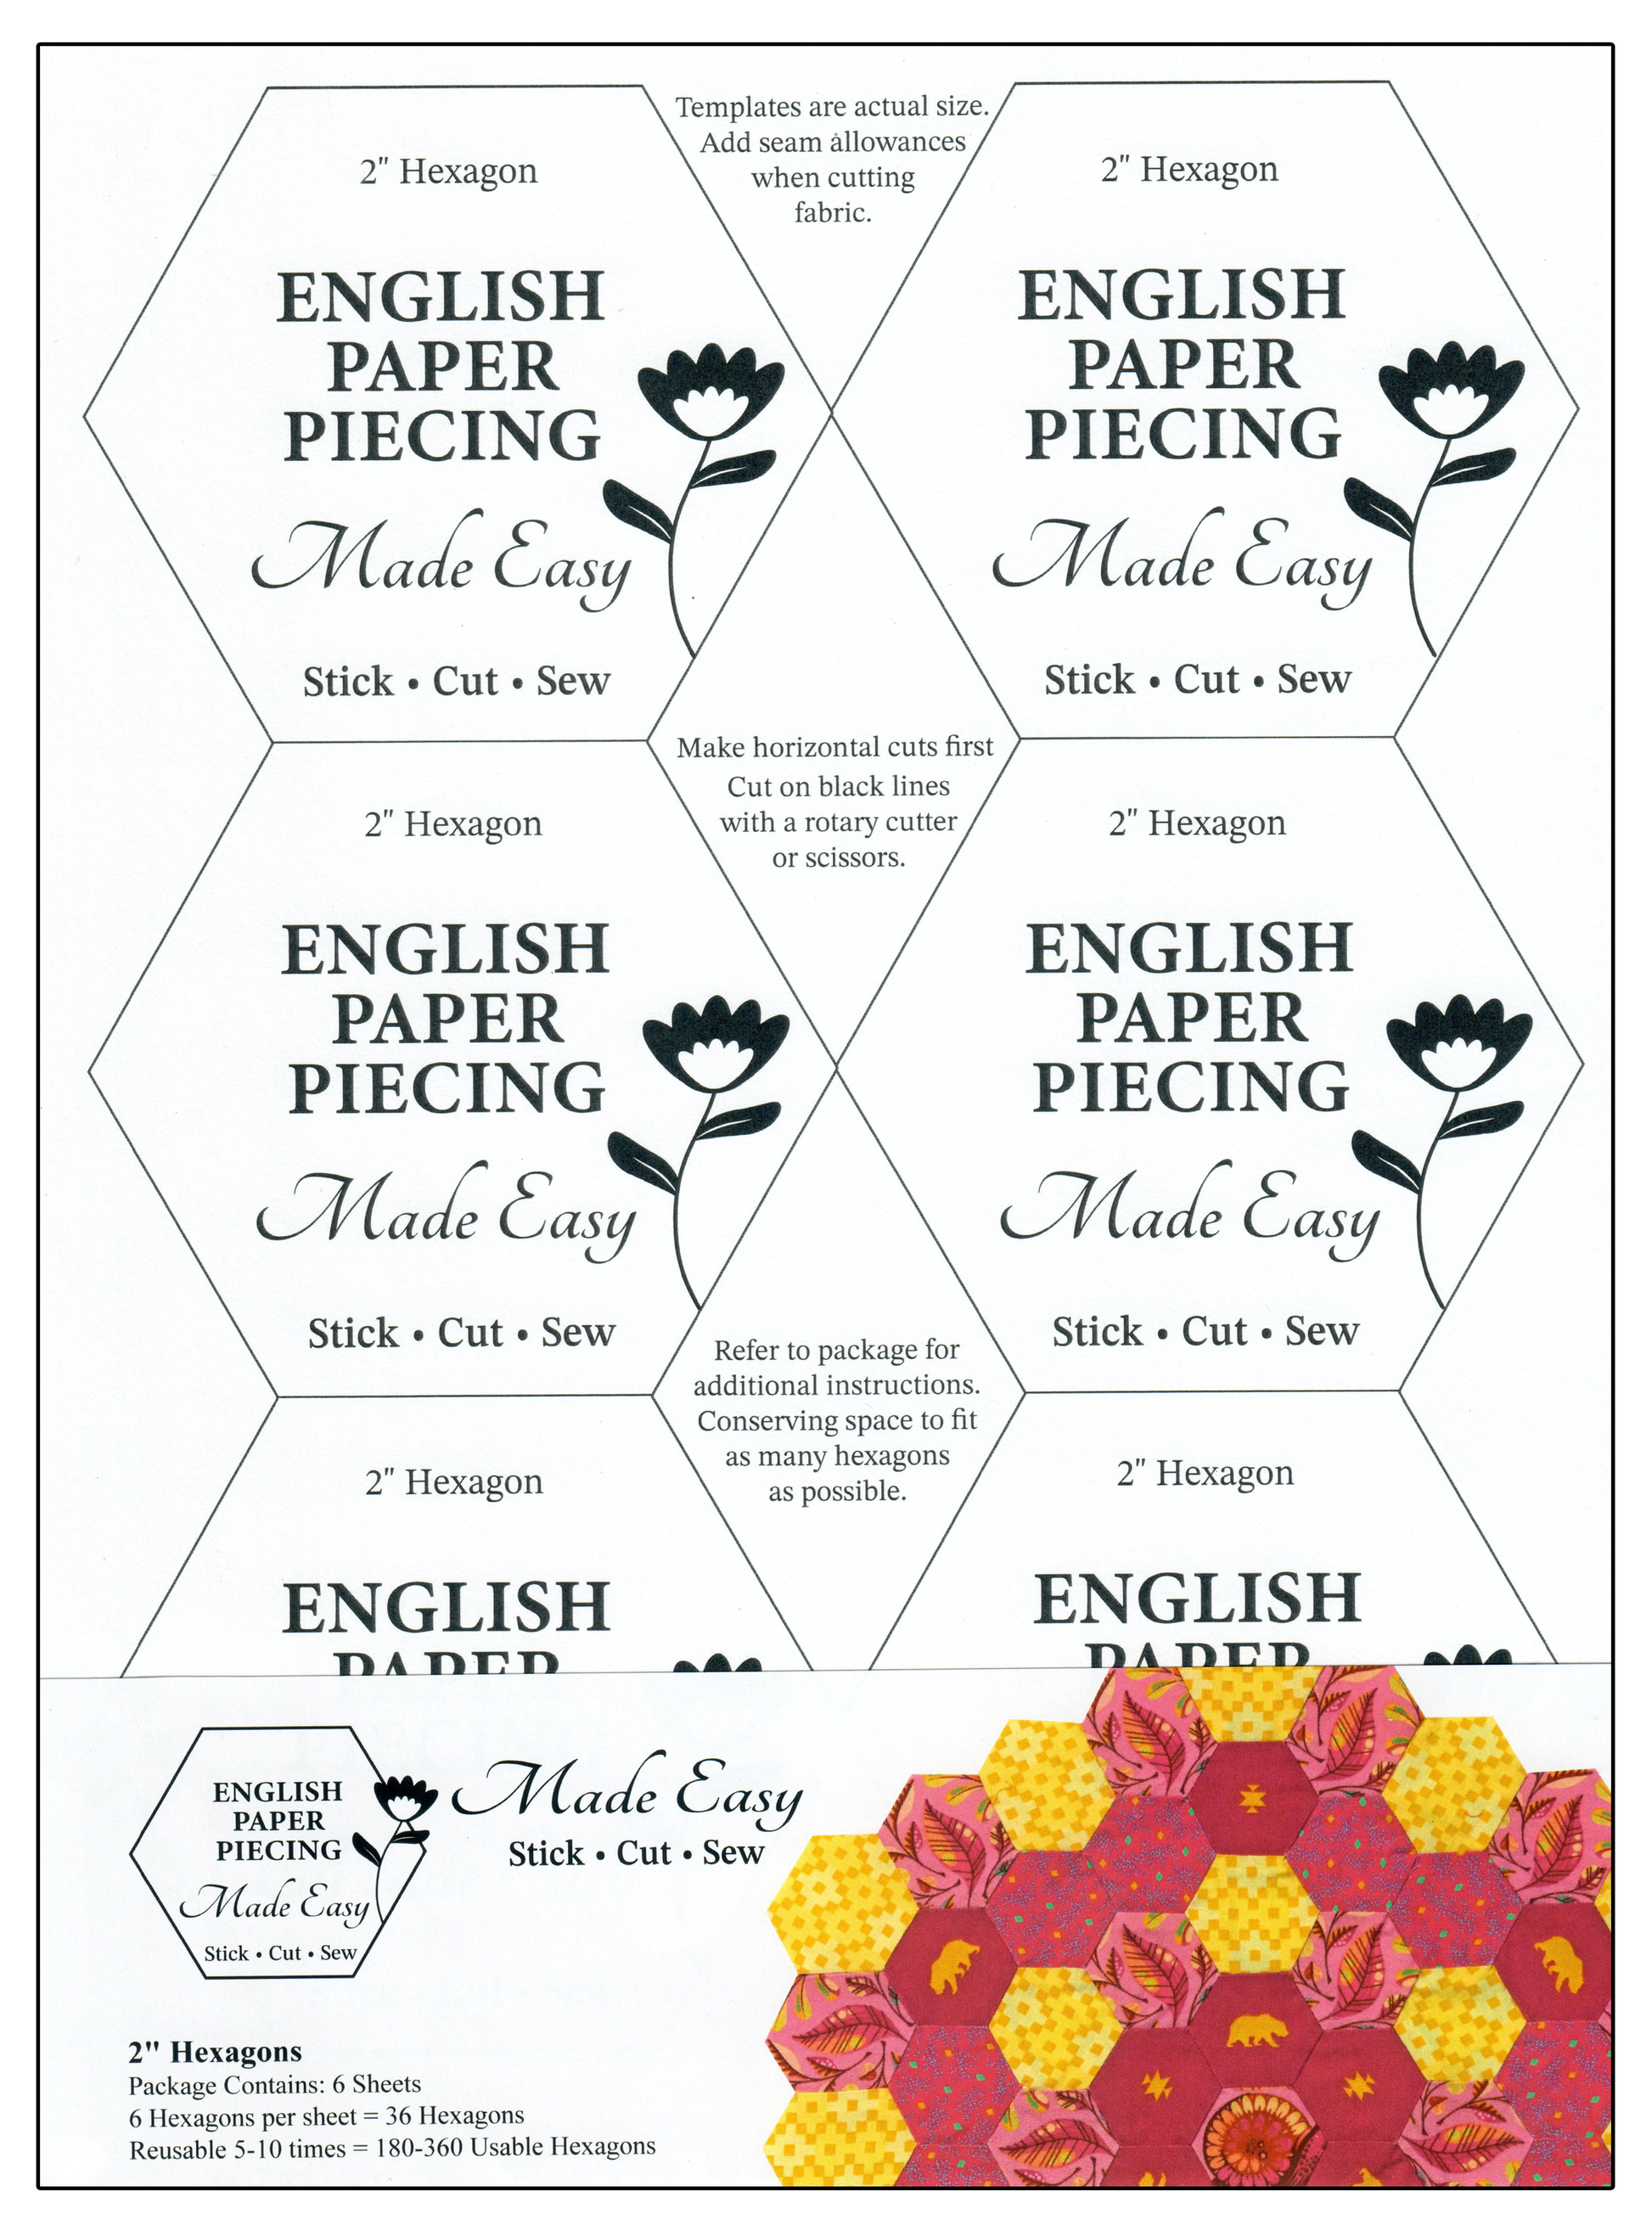 English Paper Piecing Made Easy 2 inch hexagons self stick  templates no basting gluing whipstitching or pulling papers